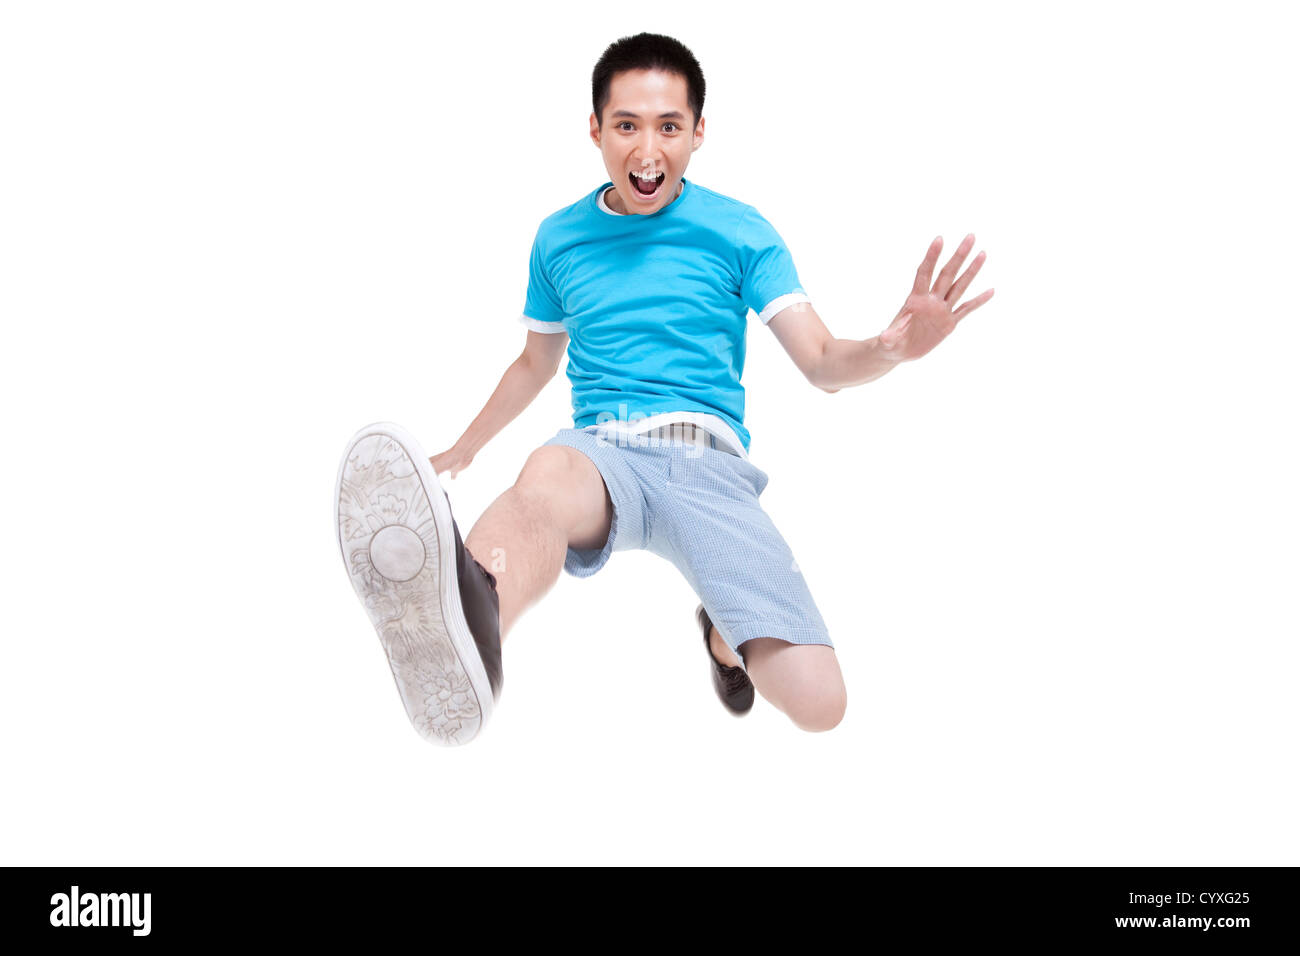 Excited young man jumping in mid air Stock Photo - Alamy